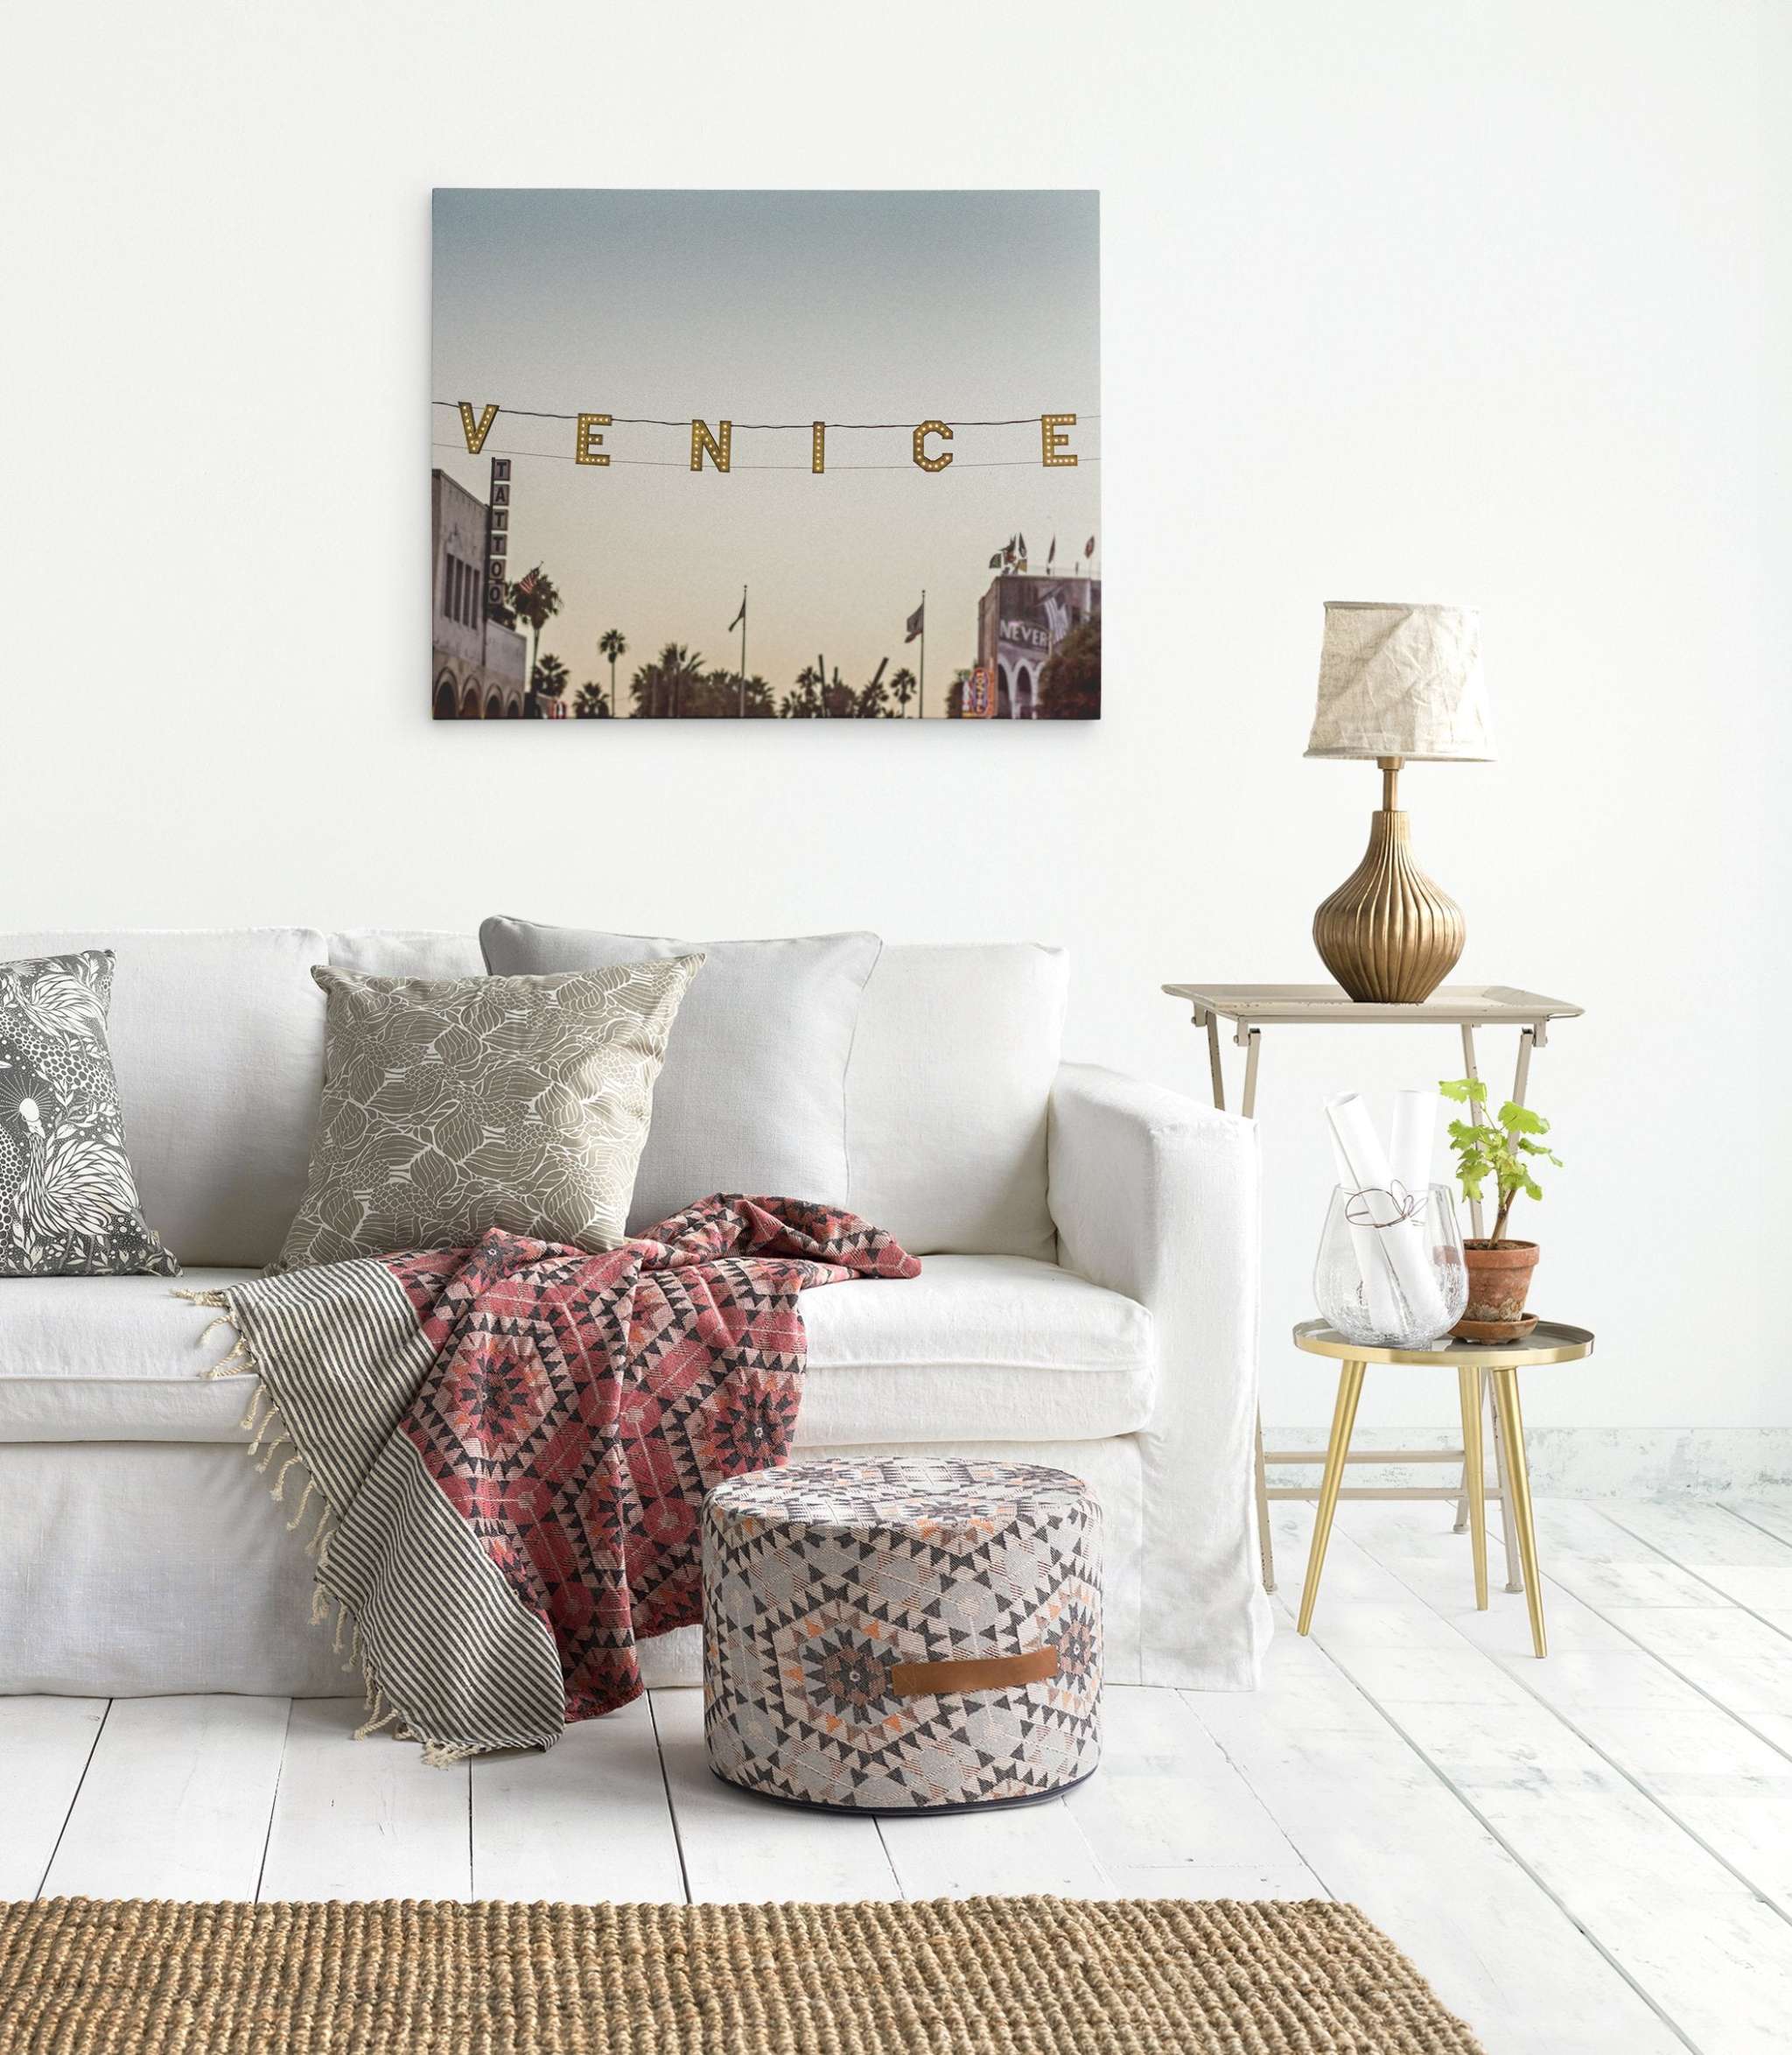 A cozy, stylish living room features a white sofa with patterned cushions and a throw blanket, a round patterned ottoman, and a side table with a lamp and plant. A premium Offley Green artist-grade canvas above the sofa reads "California Venice Beach Sign Canvas Wall Art, 'Venice Sunset'." The light wood floor and woven rug complete the inviting space.